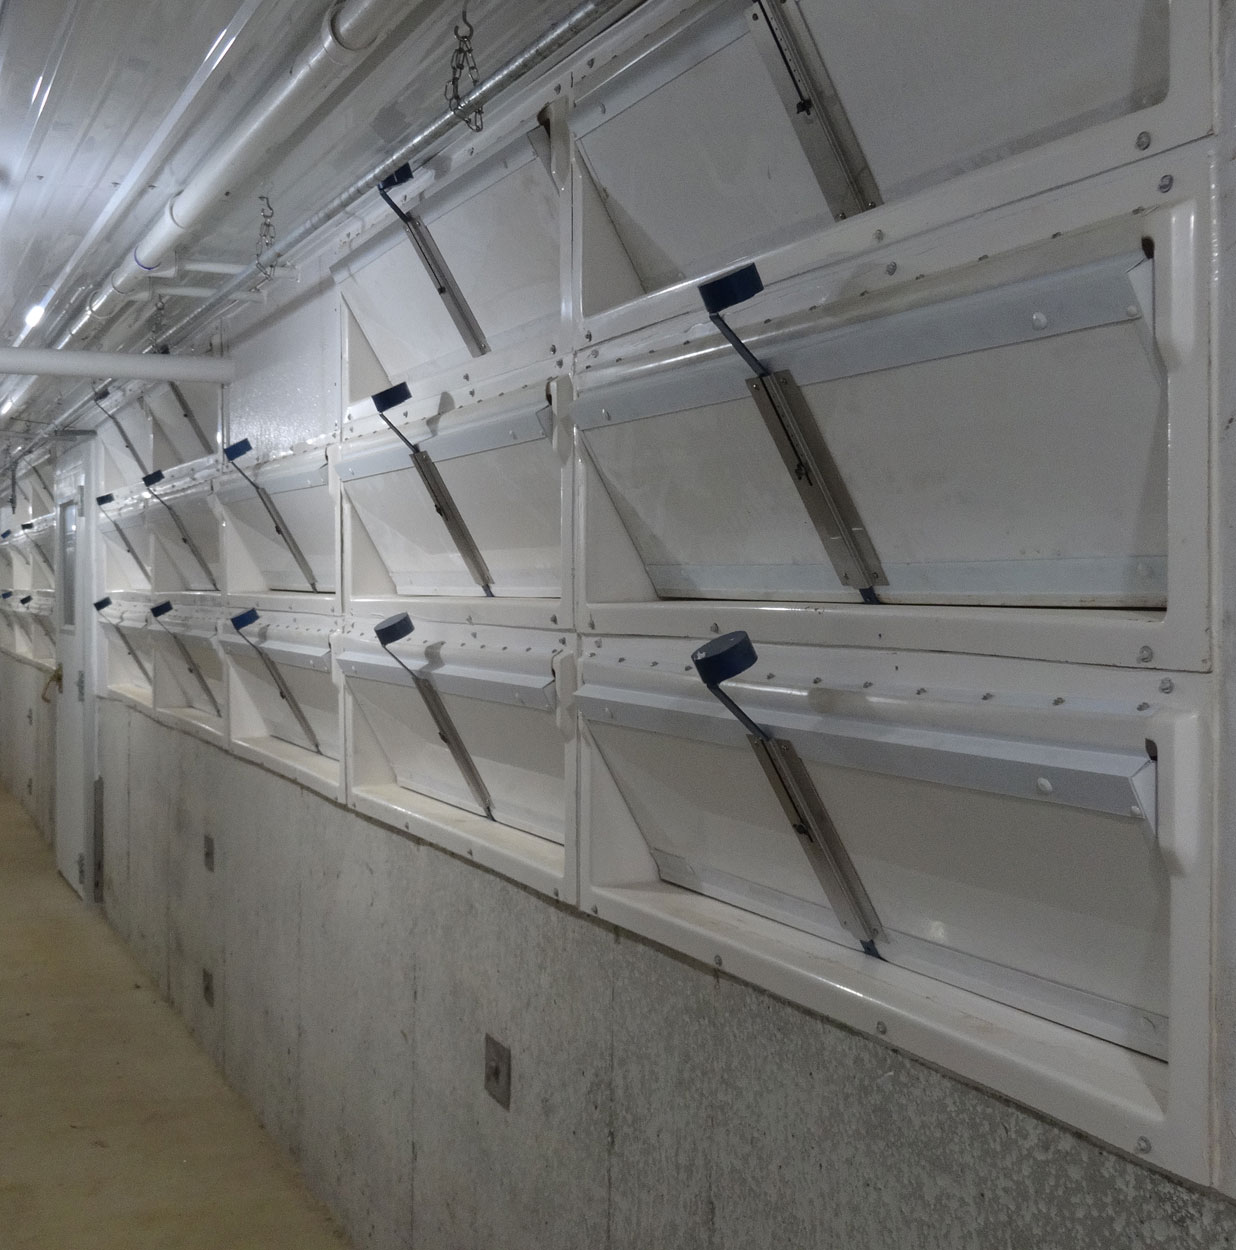 Banks of Hog Slat single wall air inlets can be installed for each farrowing room in a barn; allowing producers to customize and quickly adjust the incoming air flow for each room individually.